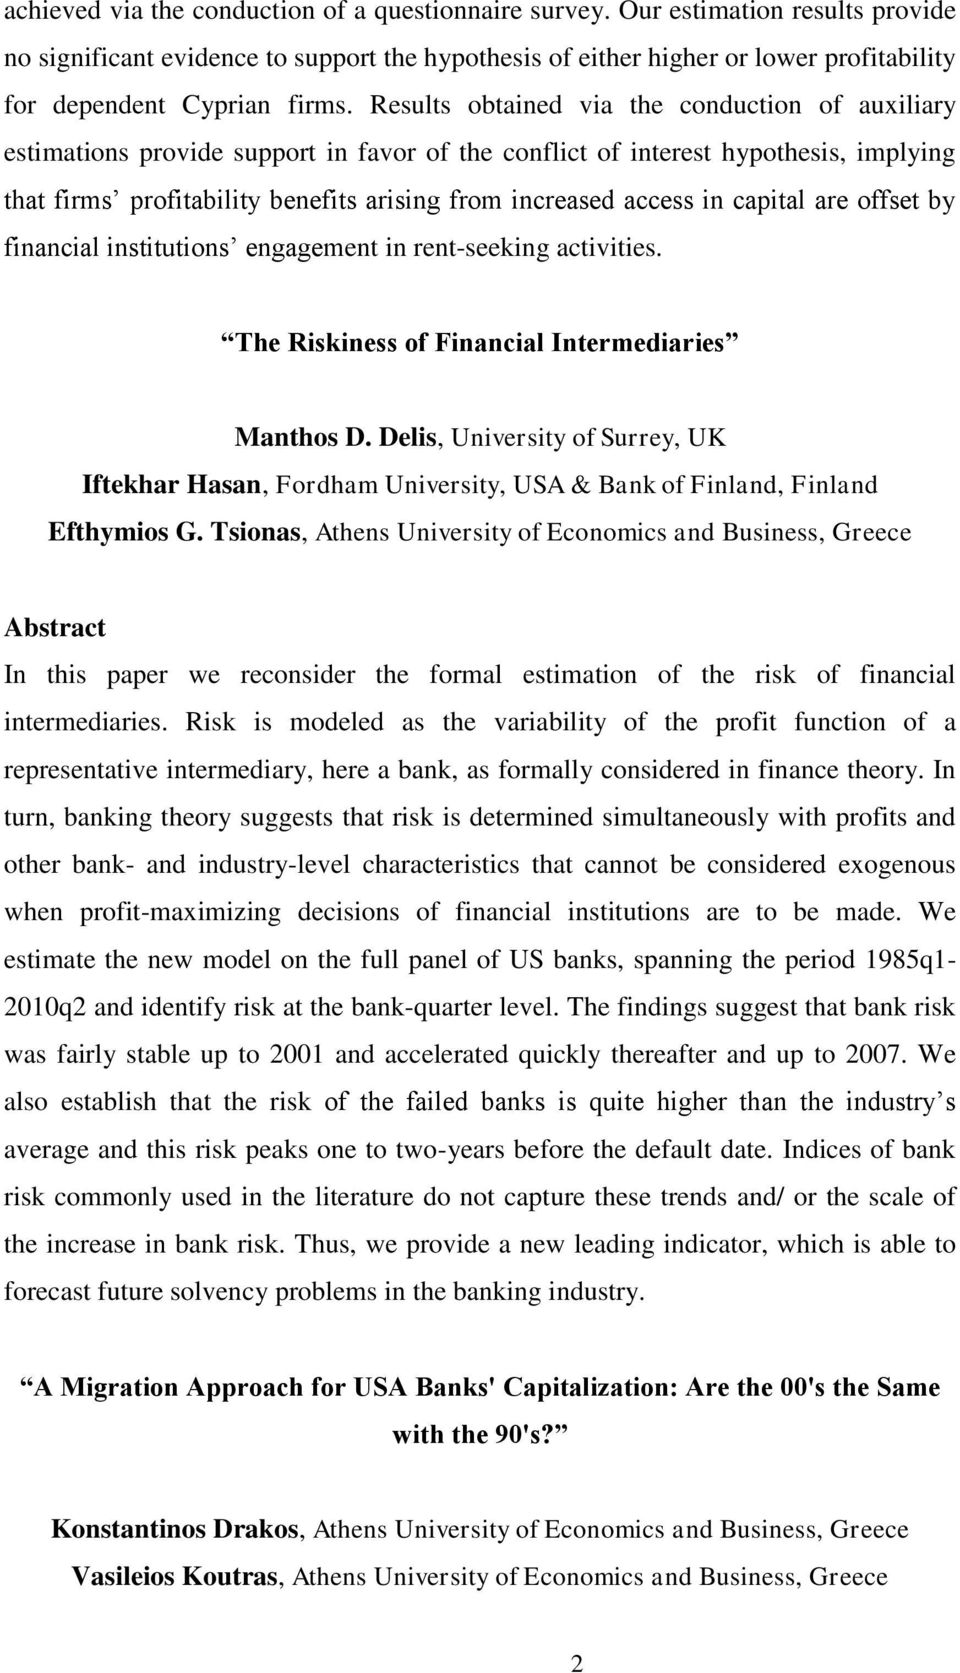 Results obtained via the conduction of auxiliary estimations provide support in favor of the conflict of interest hypothesis, implying that firms profitability benefits arising from increased access